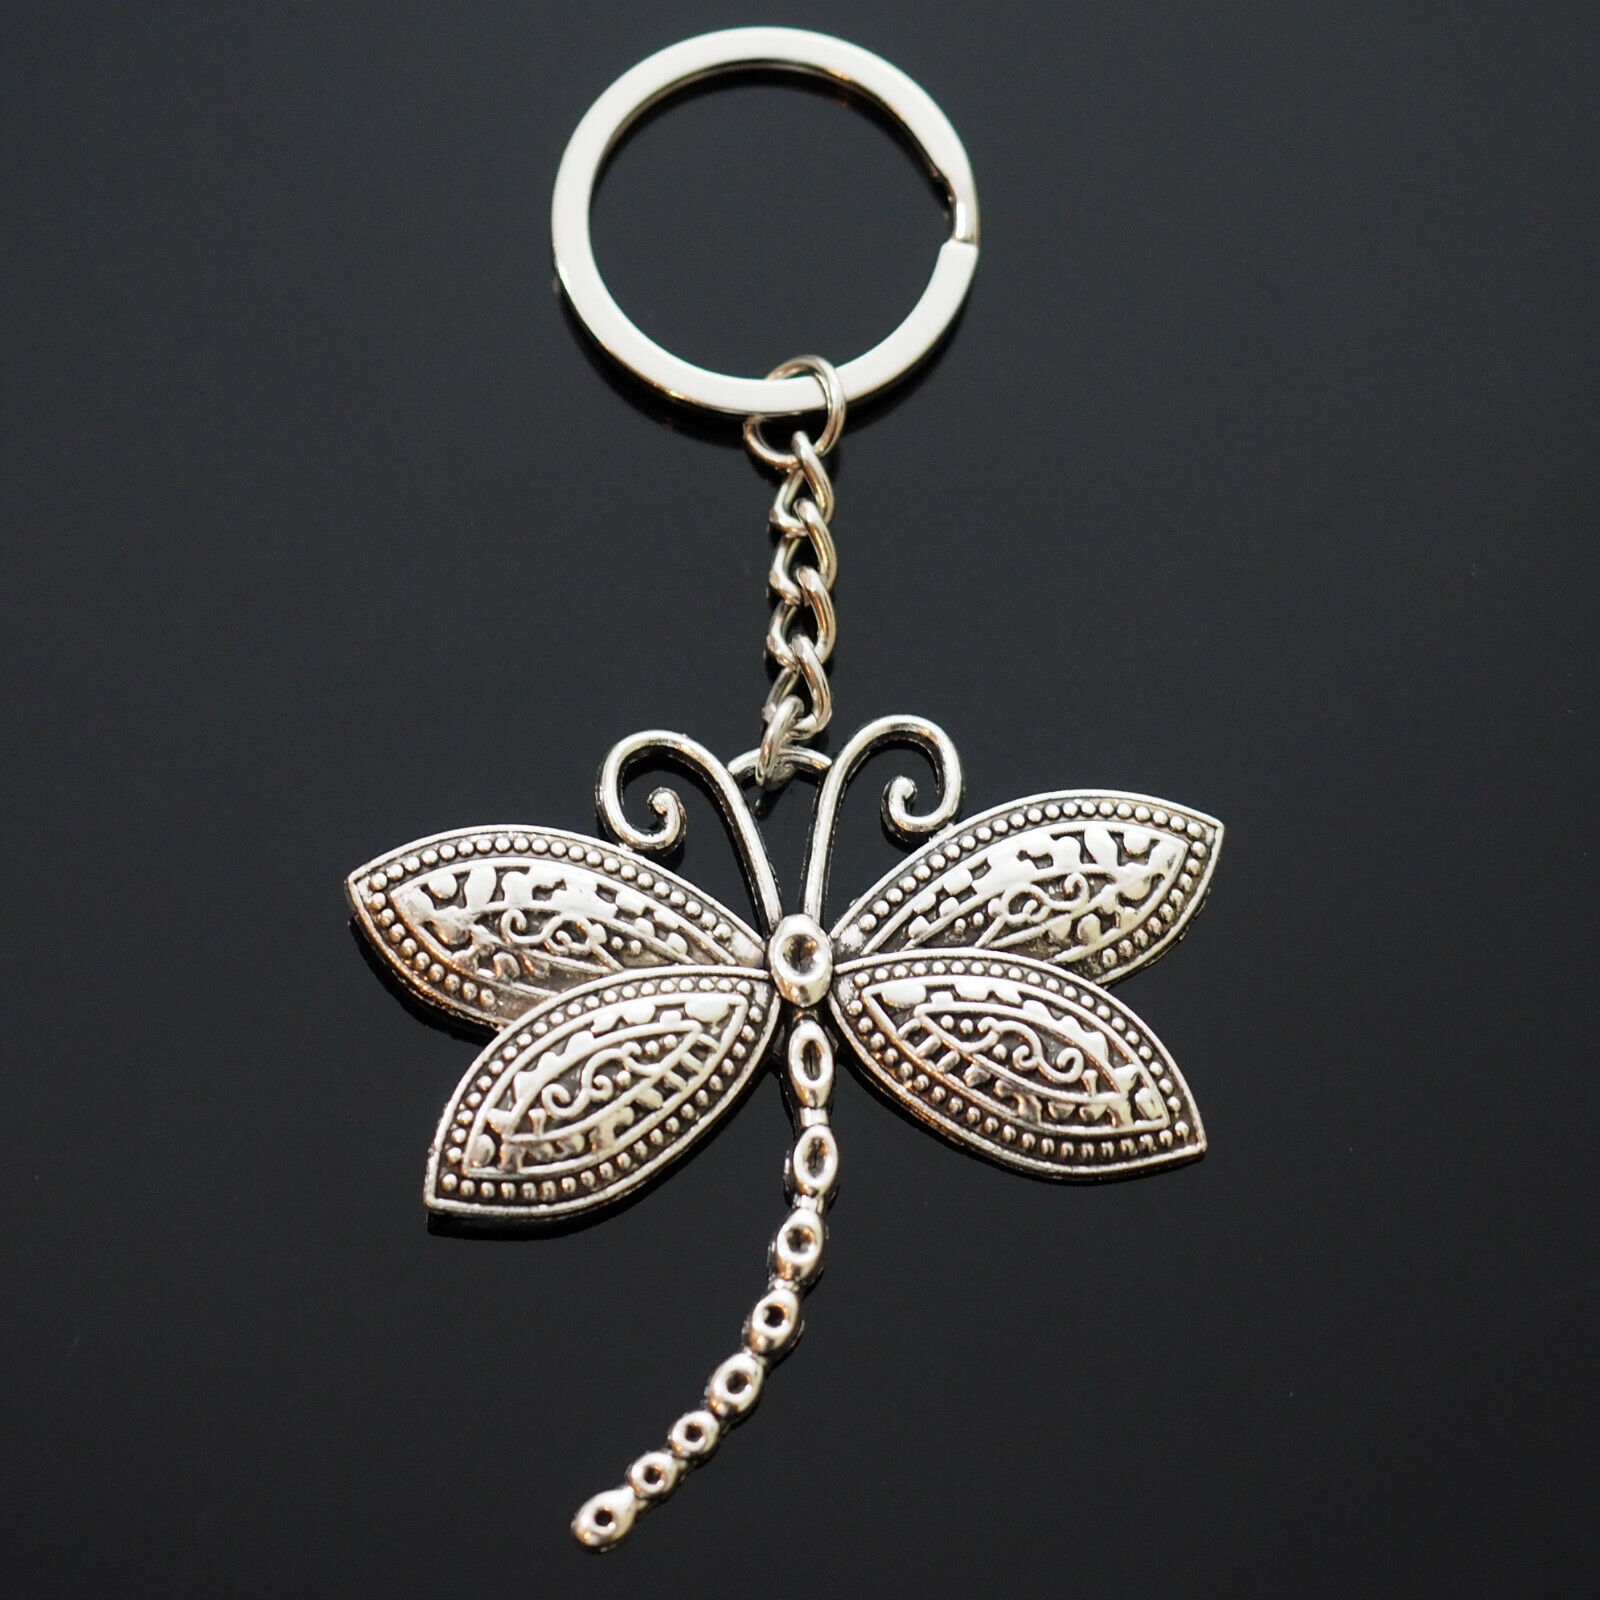 Dragonfly Key Chain Silver Pendant Charm Keychain Insect Lovers Gift 60x58mm